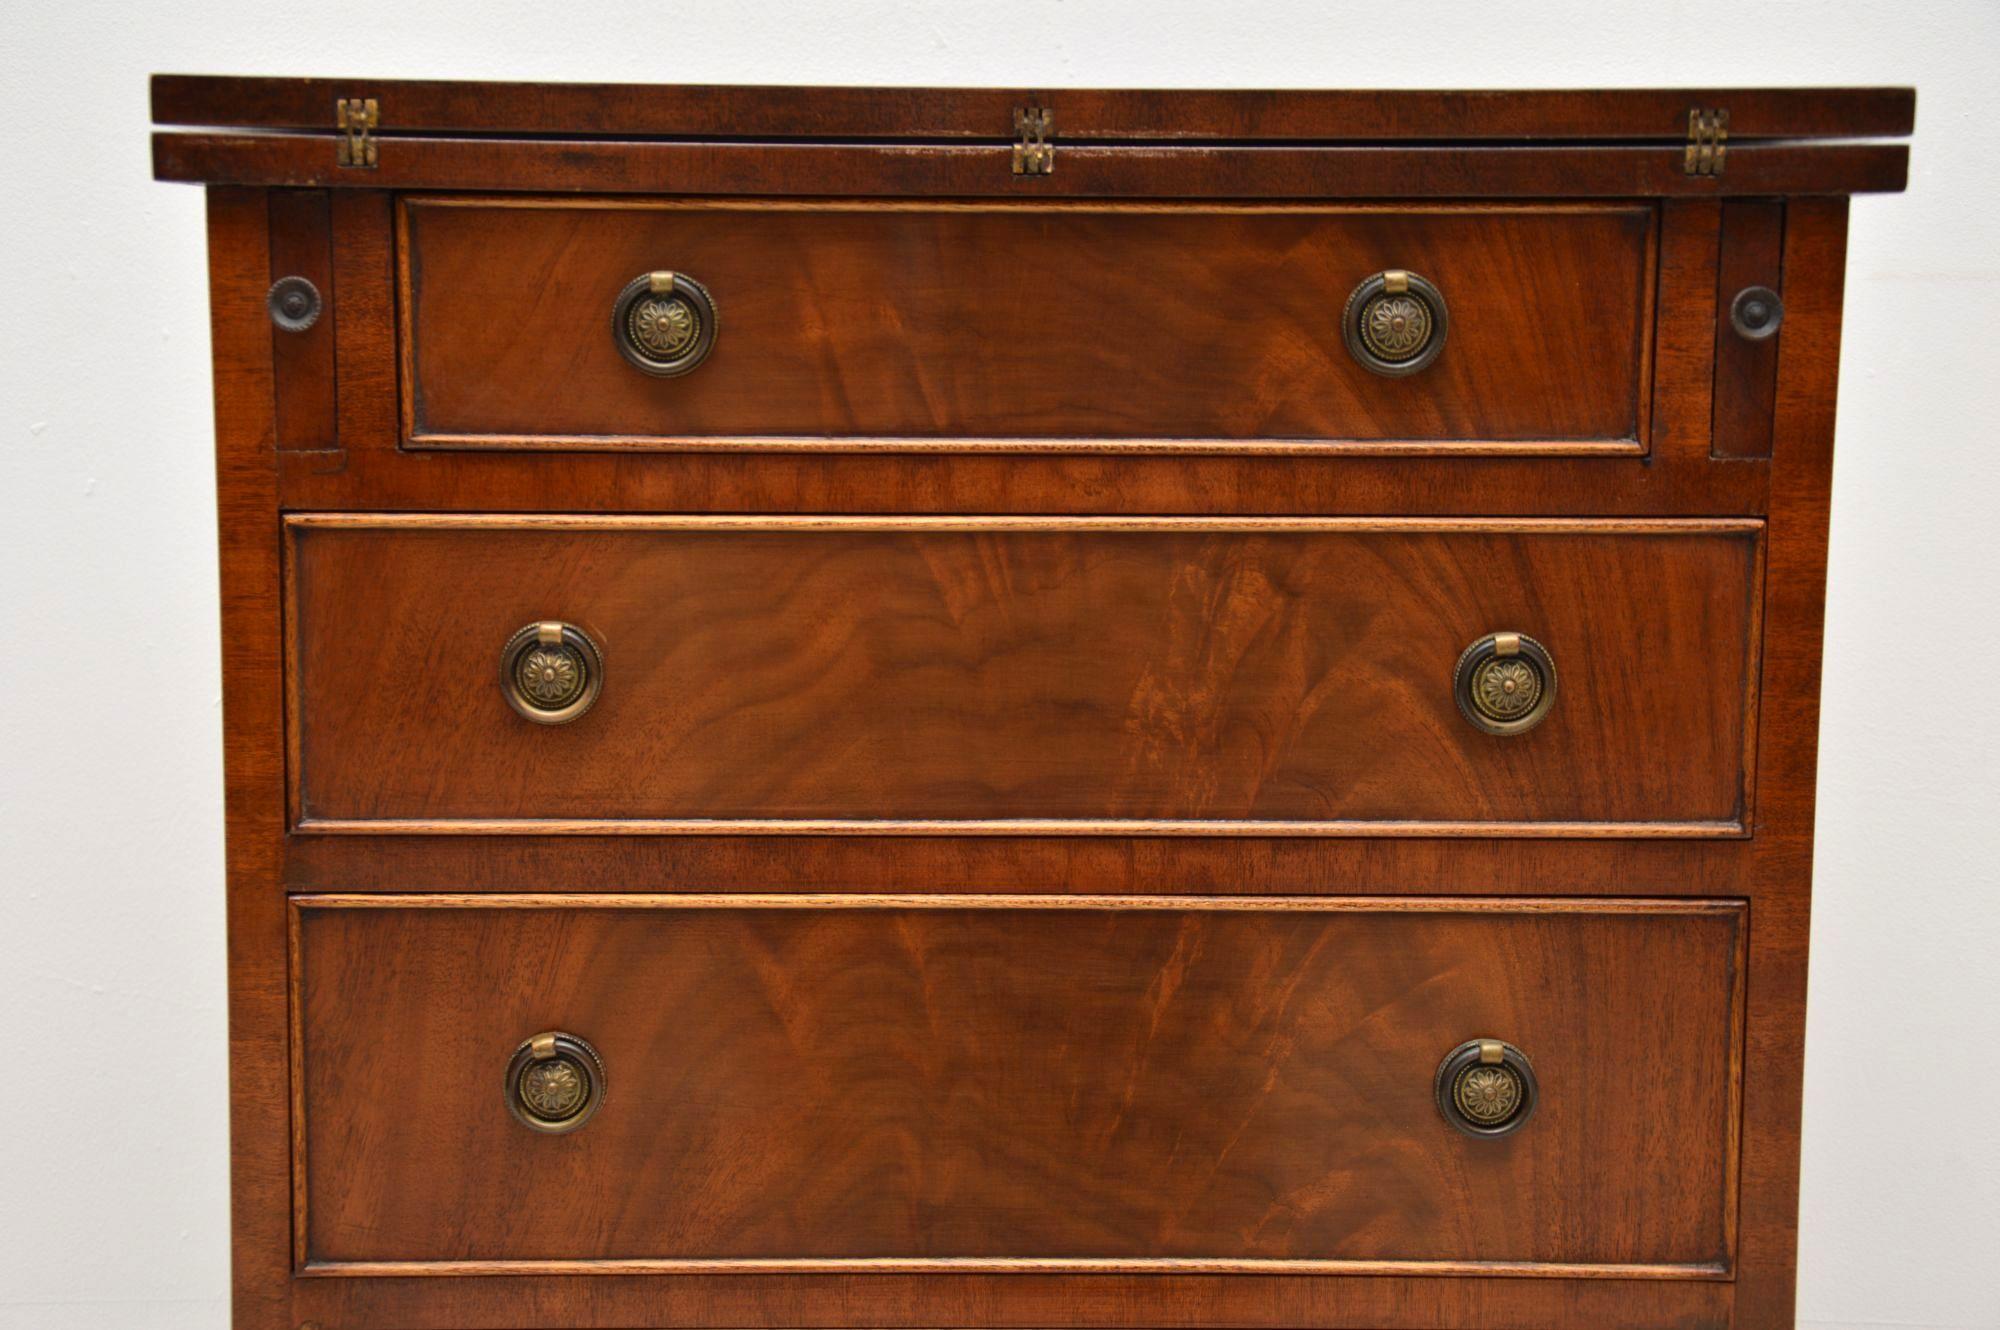 English Antique Georgian Style Mahogany Bachelors Chest of Drawers